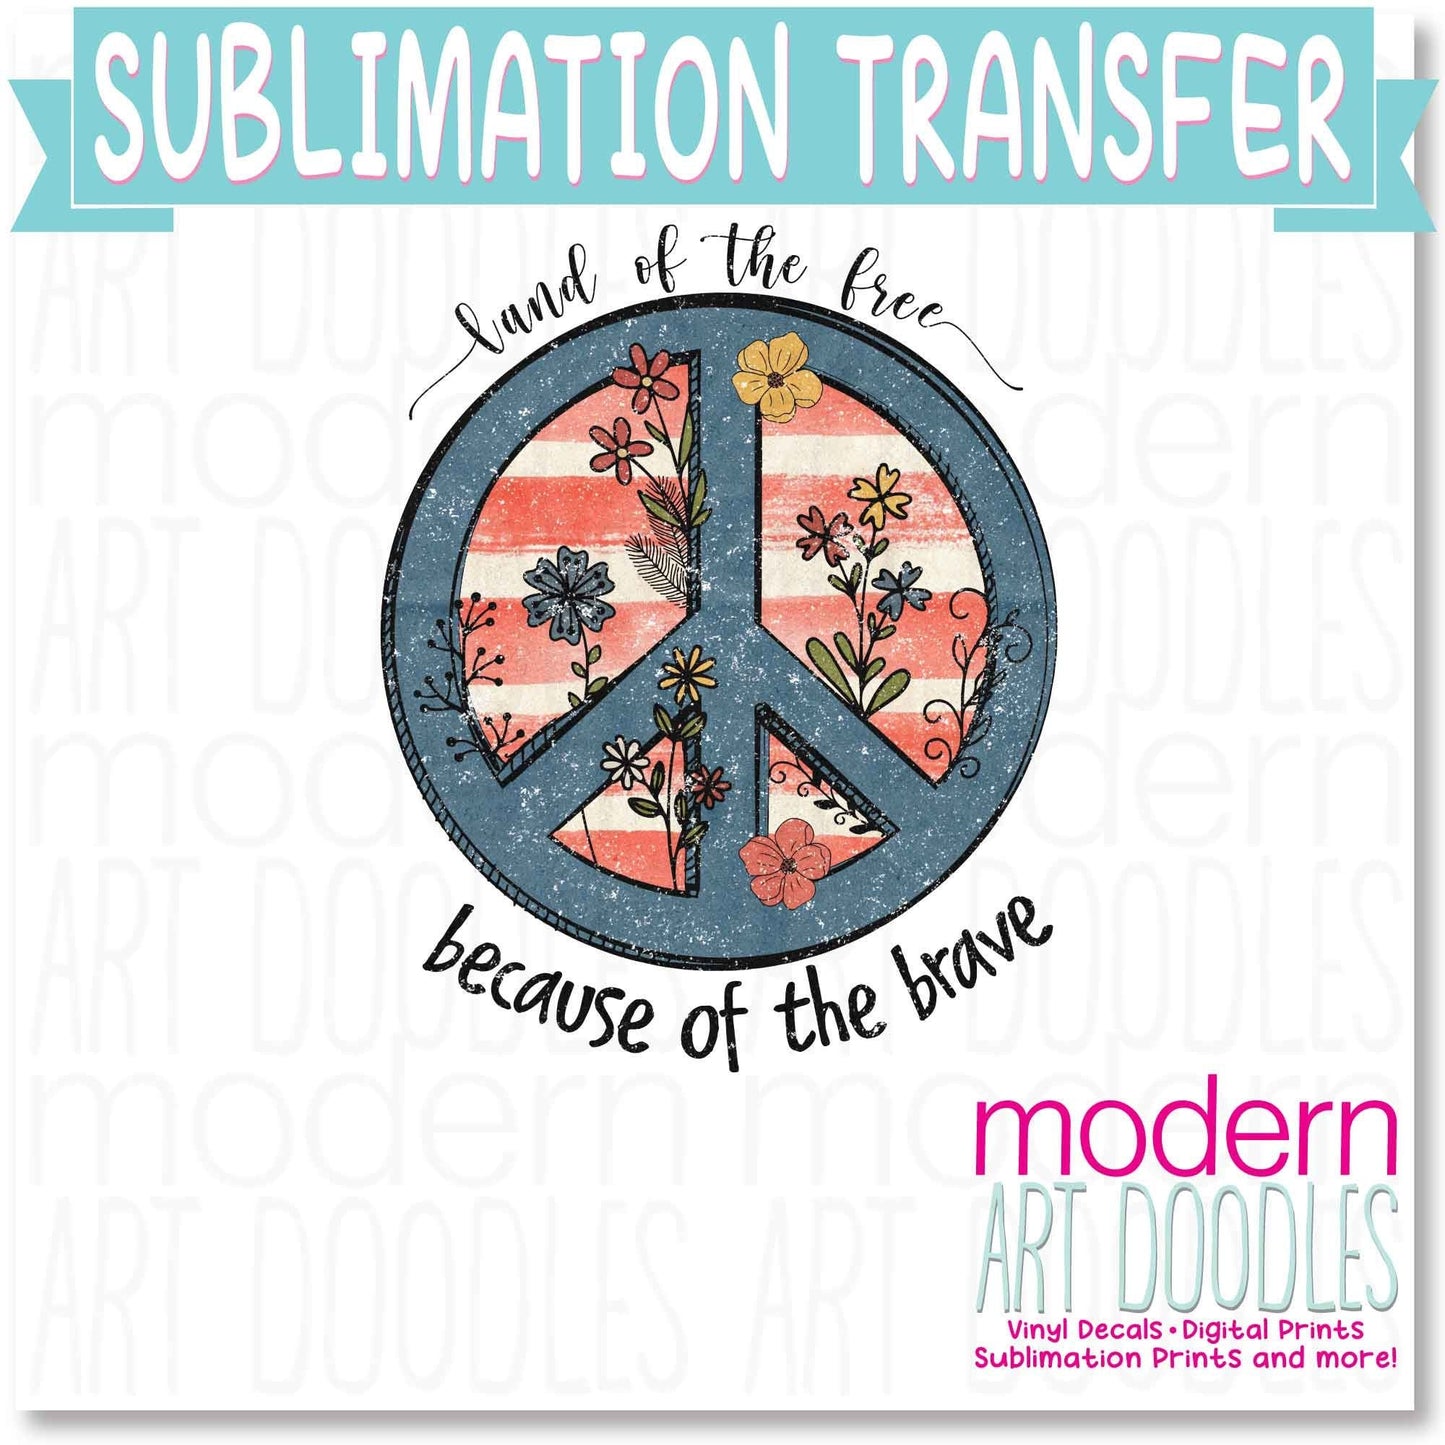 Land Of the Free Home Of The Brave 4th of July Patriotic Freedom Sublimation Print - Ready to Press - Ready to Ship